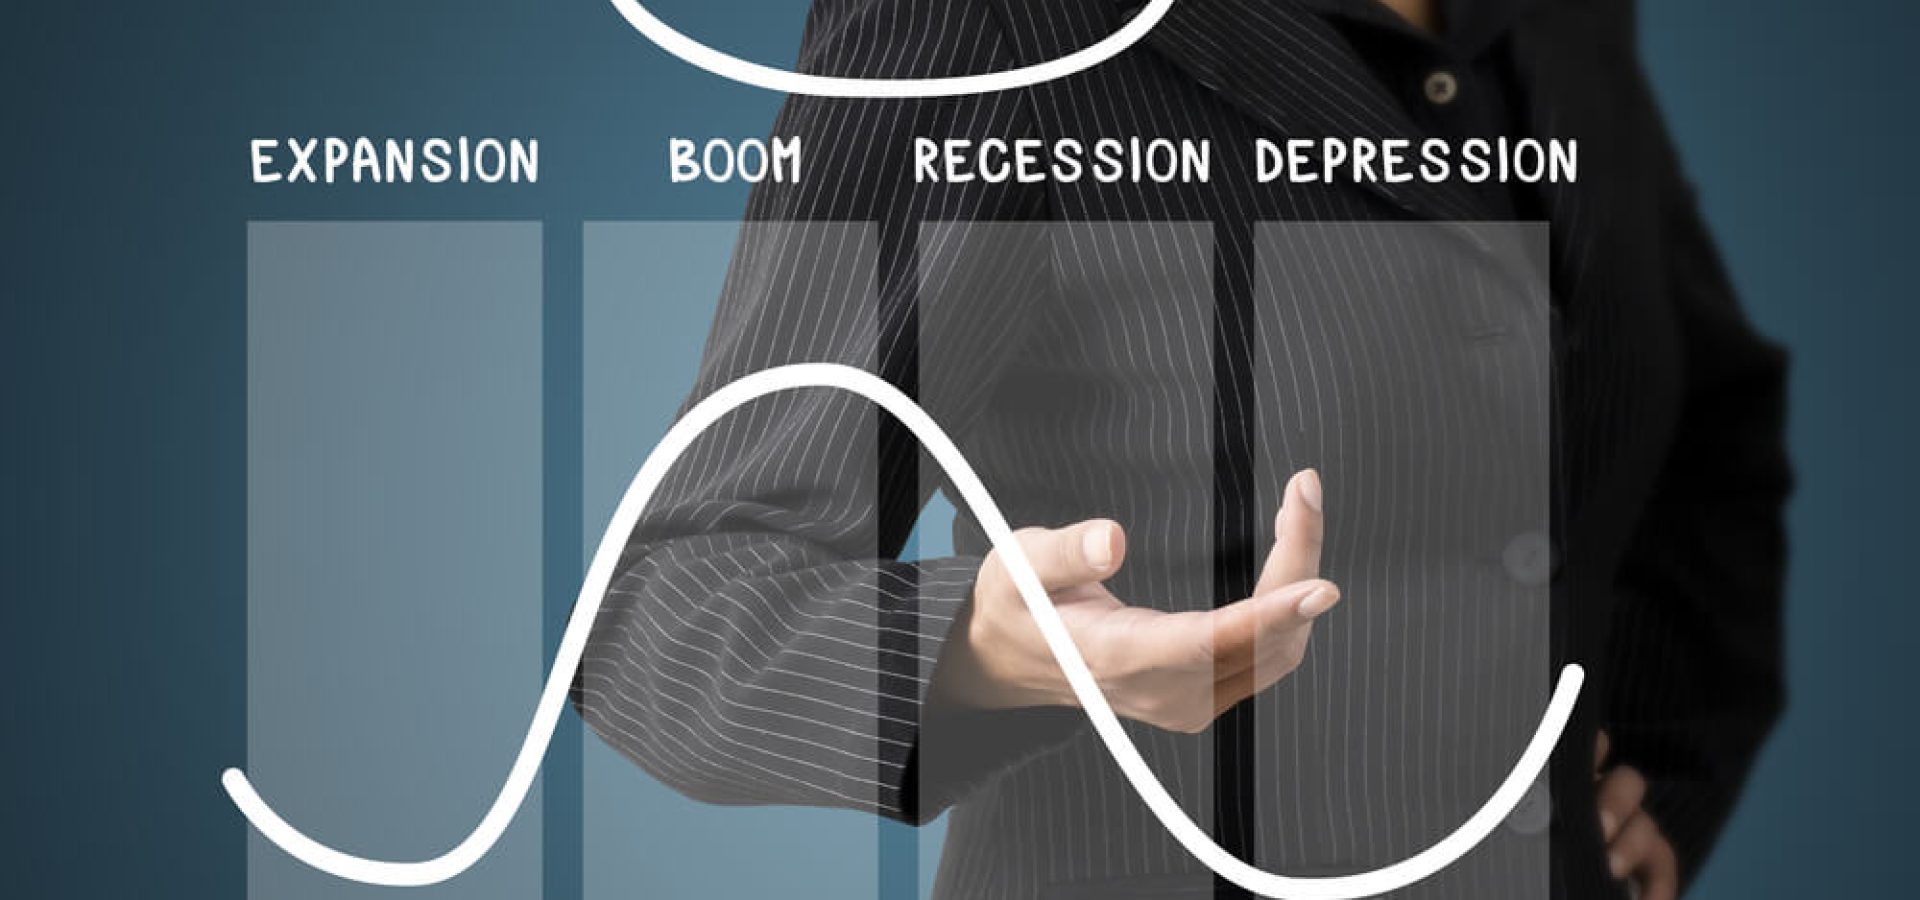 Business Cycle: Expansion, Boom, Recession, Depression